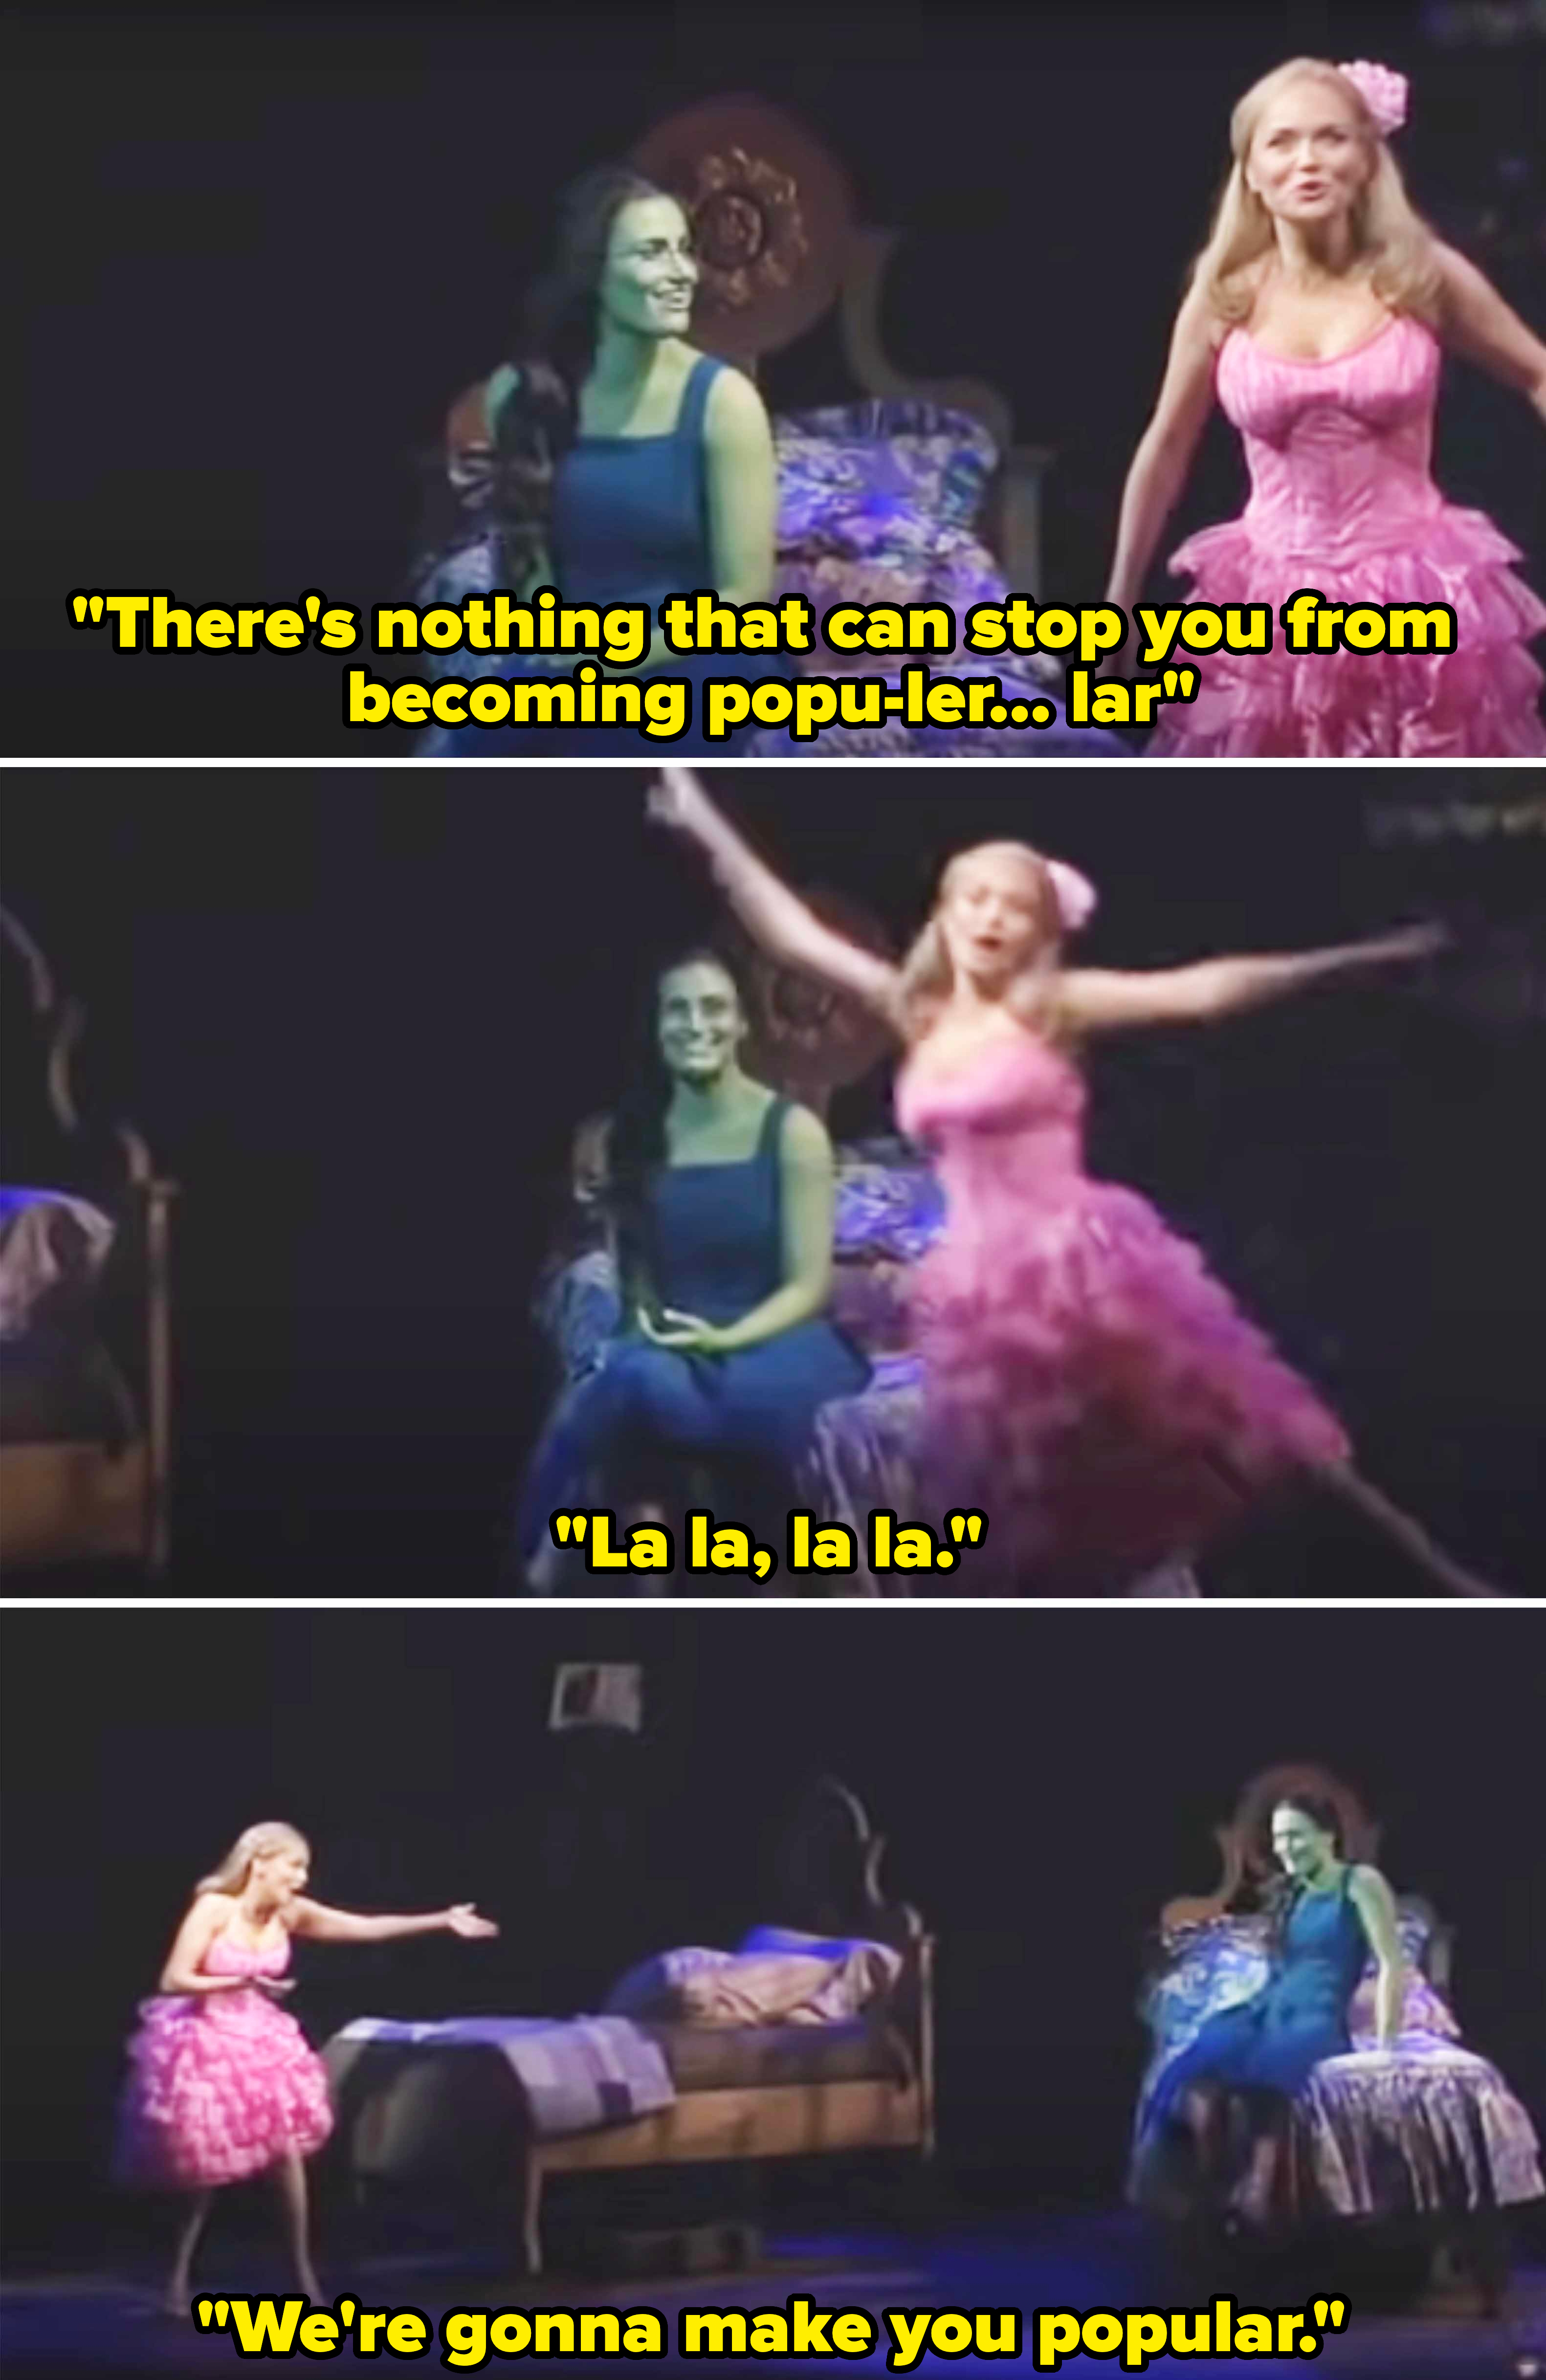 Kristin as Glinda singing &quot;There&#x27;s nothing that can stop you from becoming popu-ler, -lar&quot; and &quot;La-la-la-la&quot;